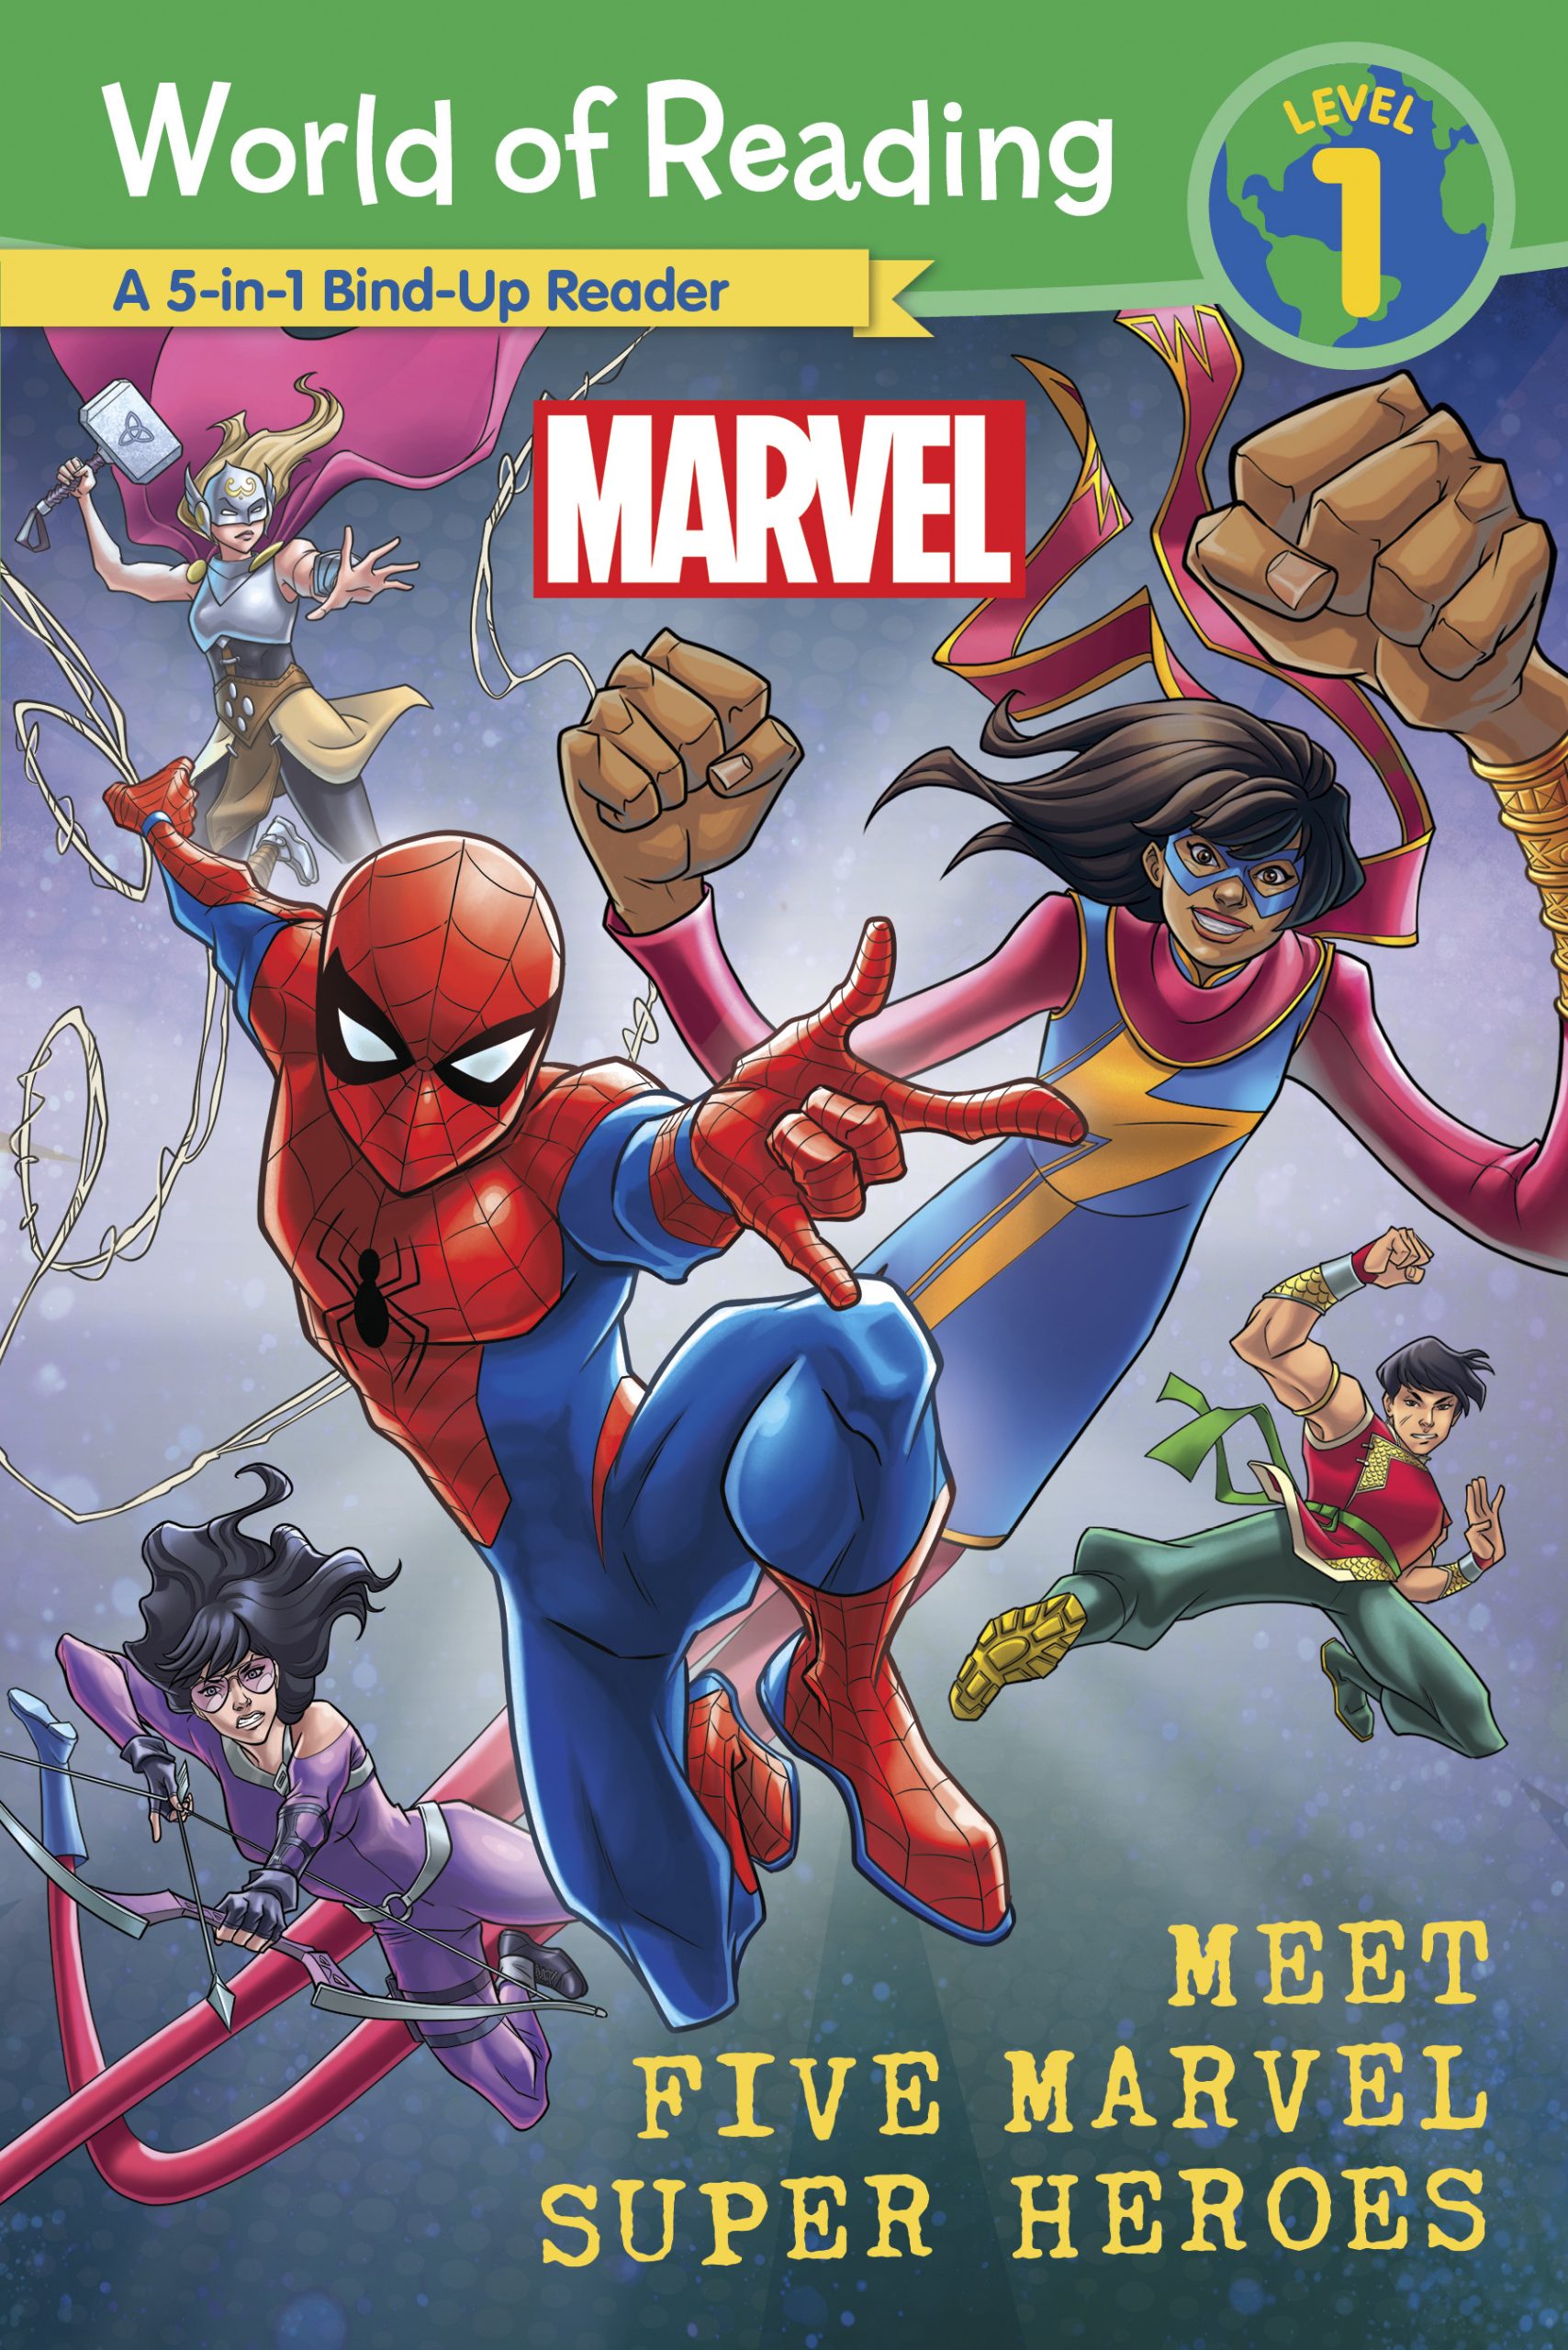 Spidey and His Amazing Friends: A Little Hulk Trouble - by Marvel Press  Book Group (Board Book)